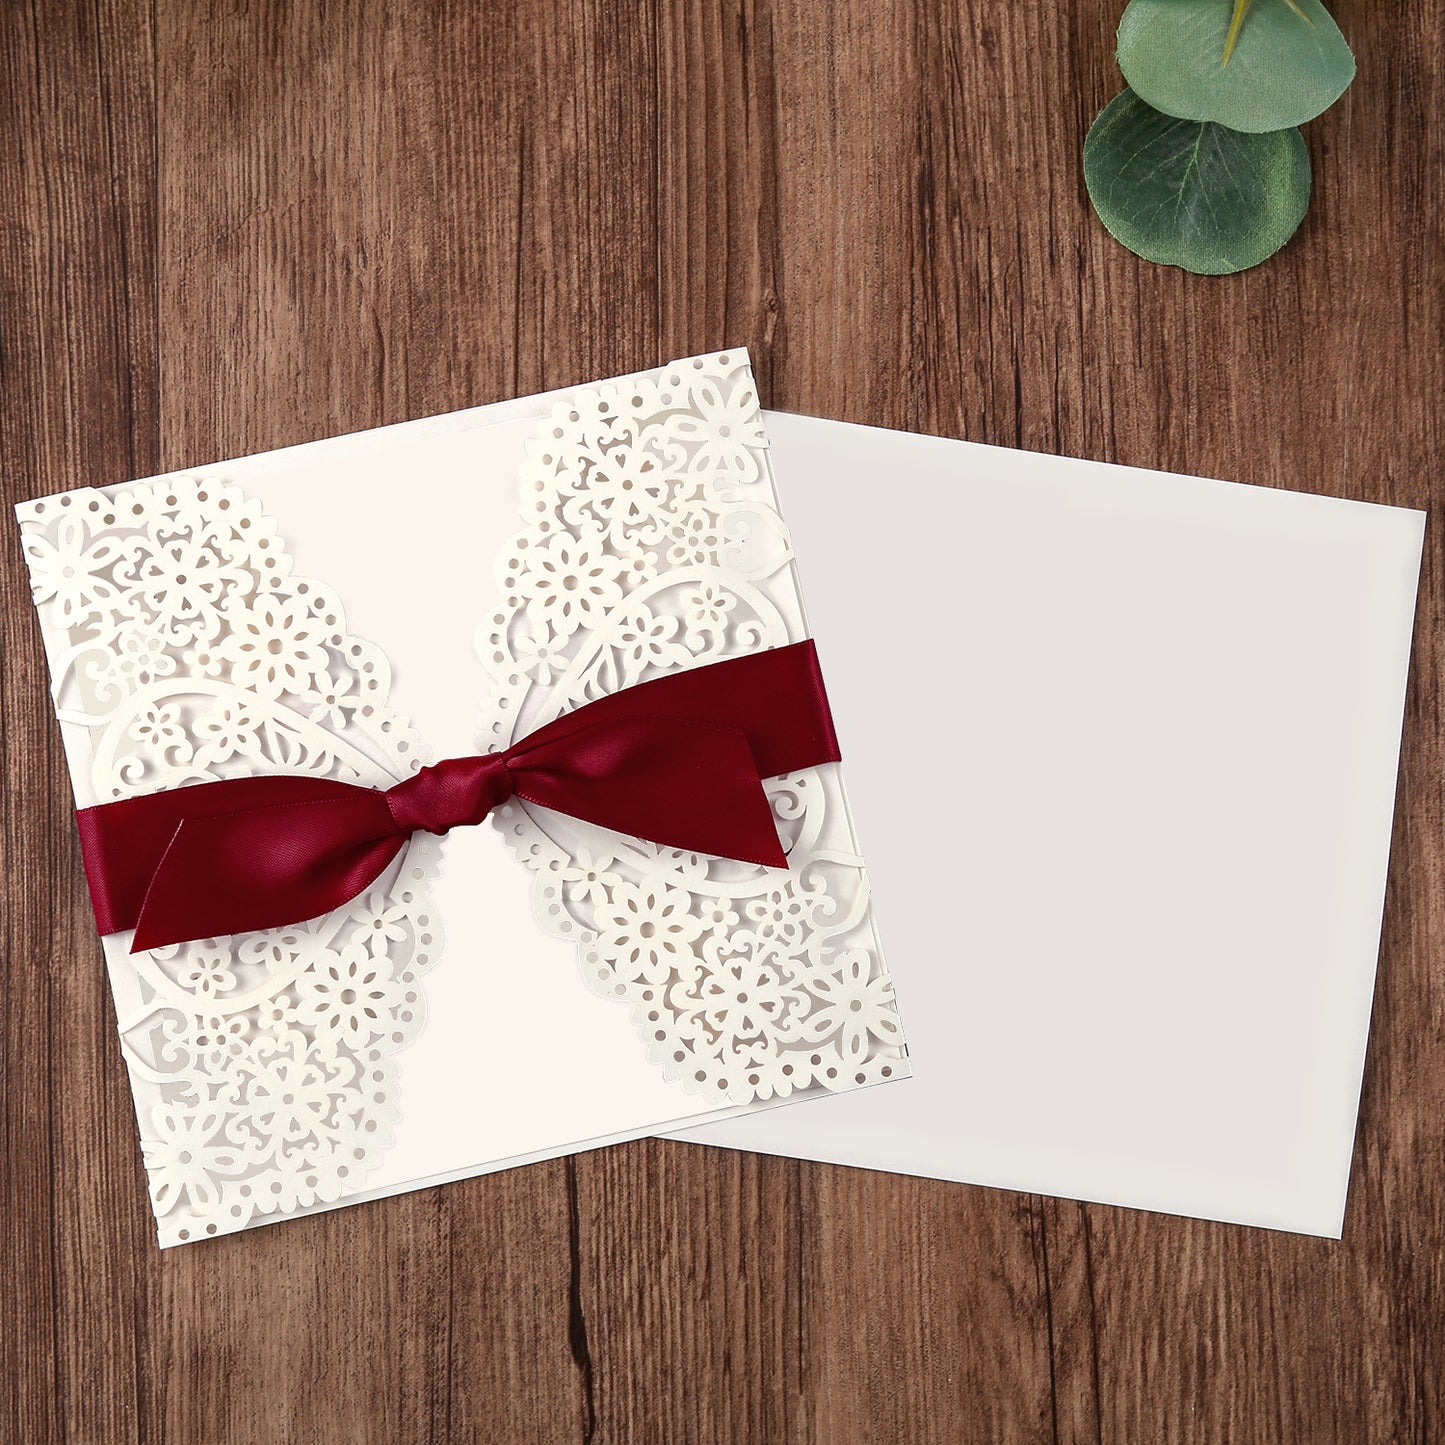 Square Invitations Cards With Burgundy Ribbon For Quinceanera - DorisHome